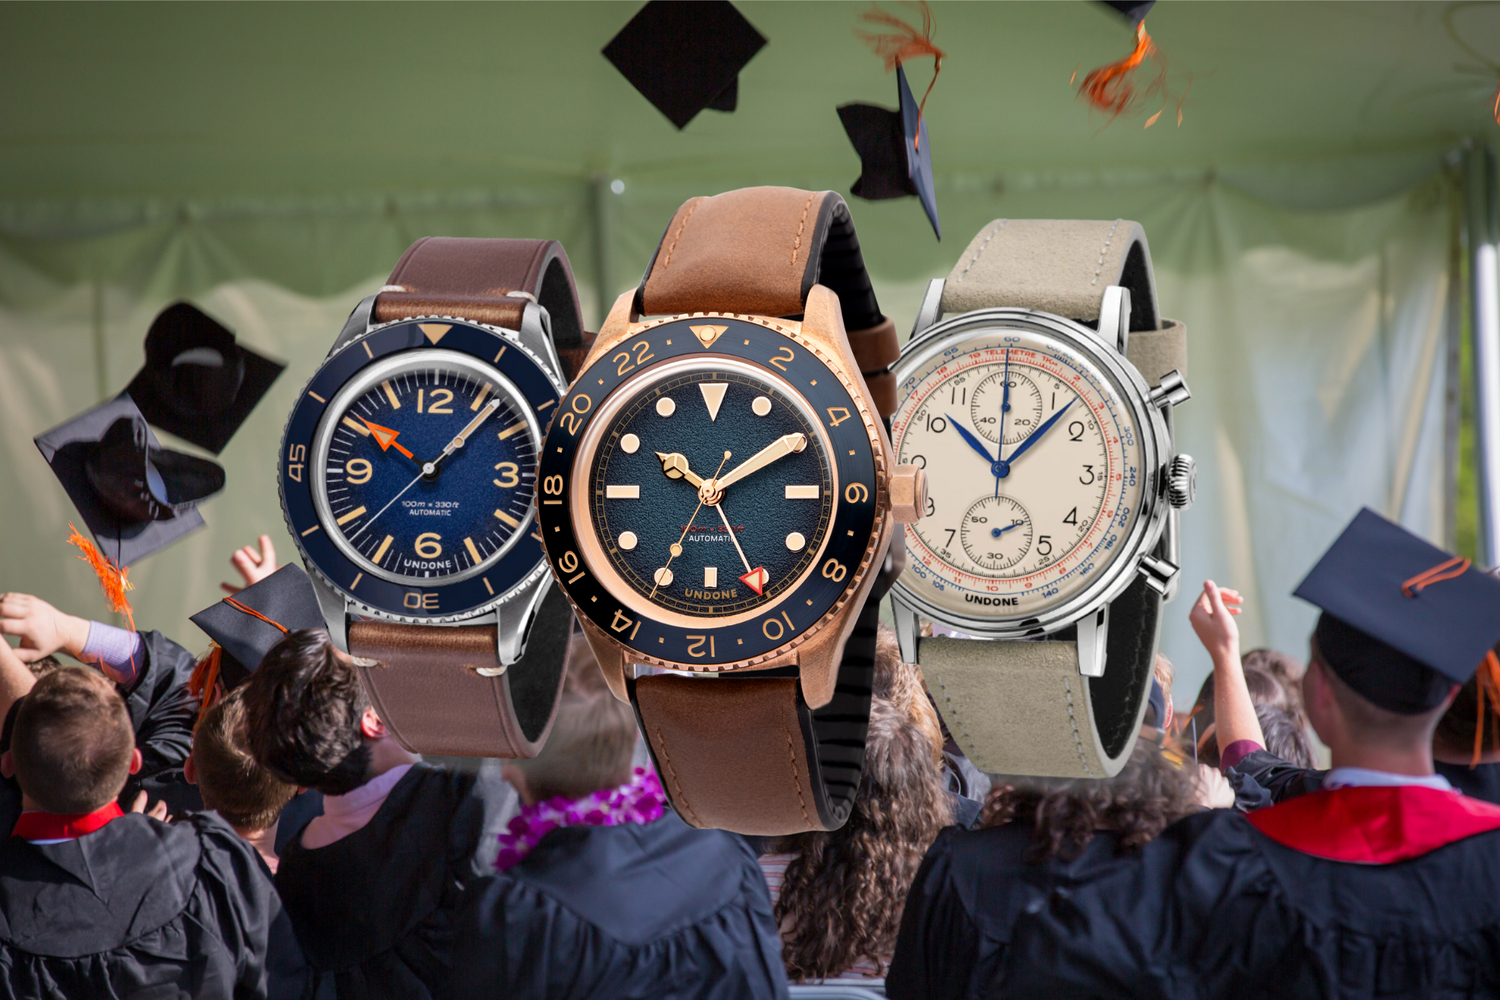 graduation watches for sale at mr watchief like undone watches